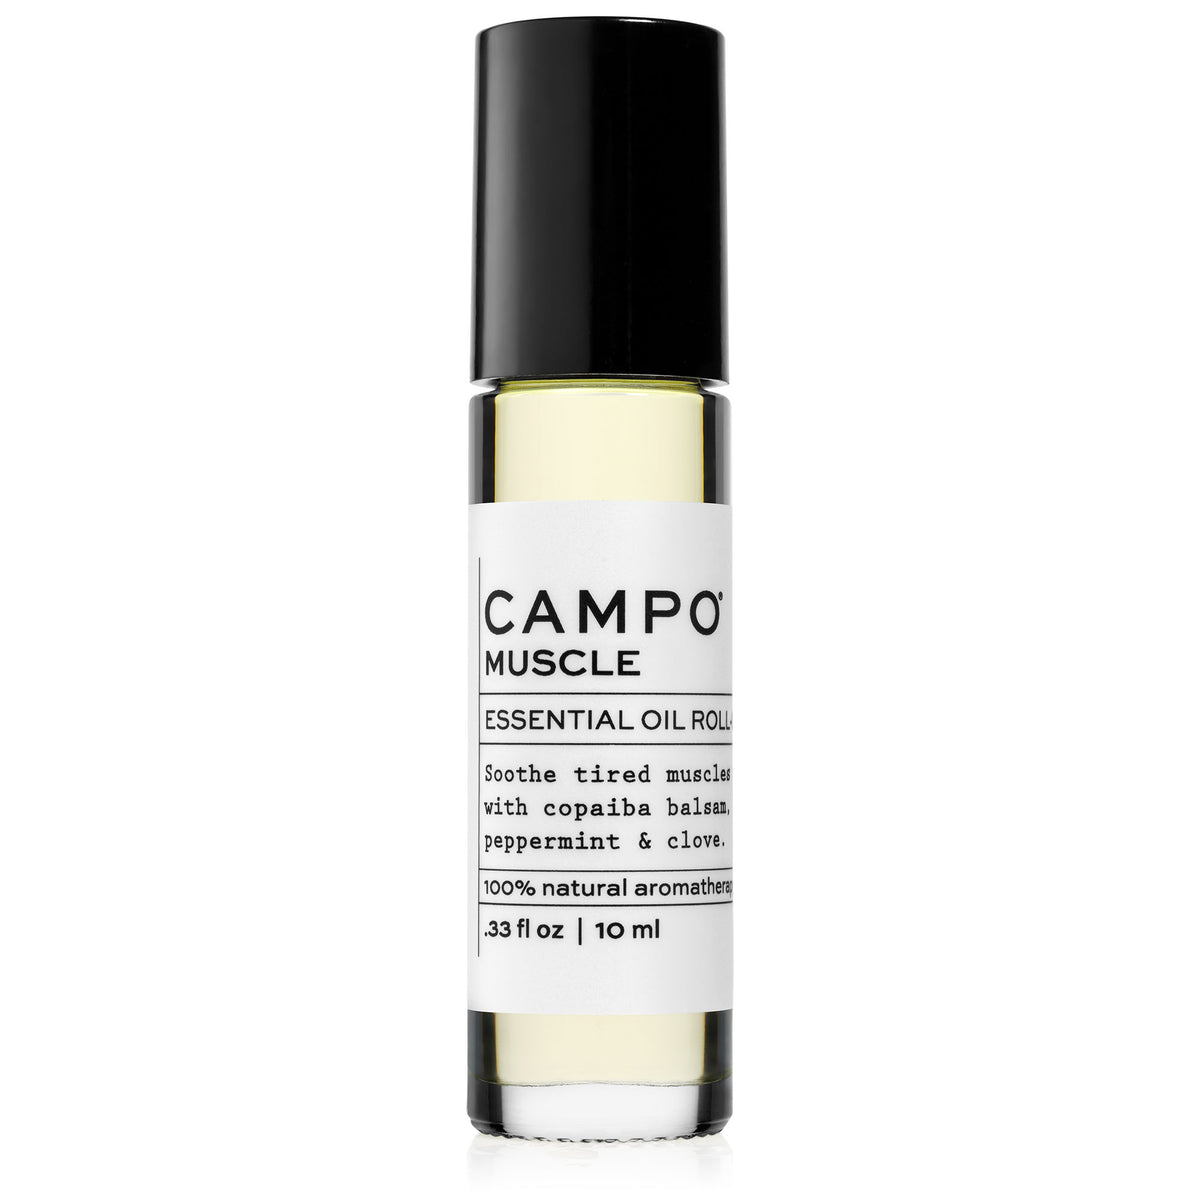 Campo Beauty Essential Oil MUSCLE Stretch Mark Relief Blend Roll-On that in 10 ml. Soothe sore muscles and pain. Relieve tension with this 100% natural essential oil roll-on blend of copaiba balsam, peppermint, eucalyptus &amp; clove.